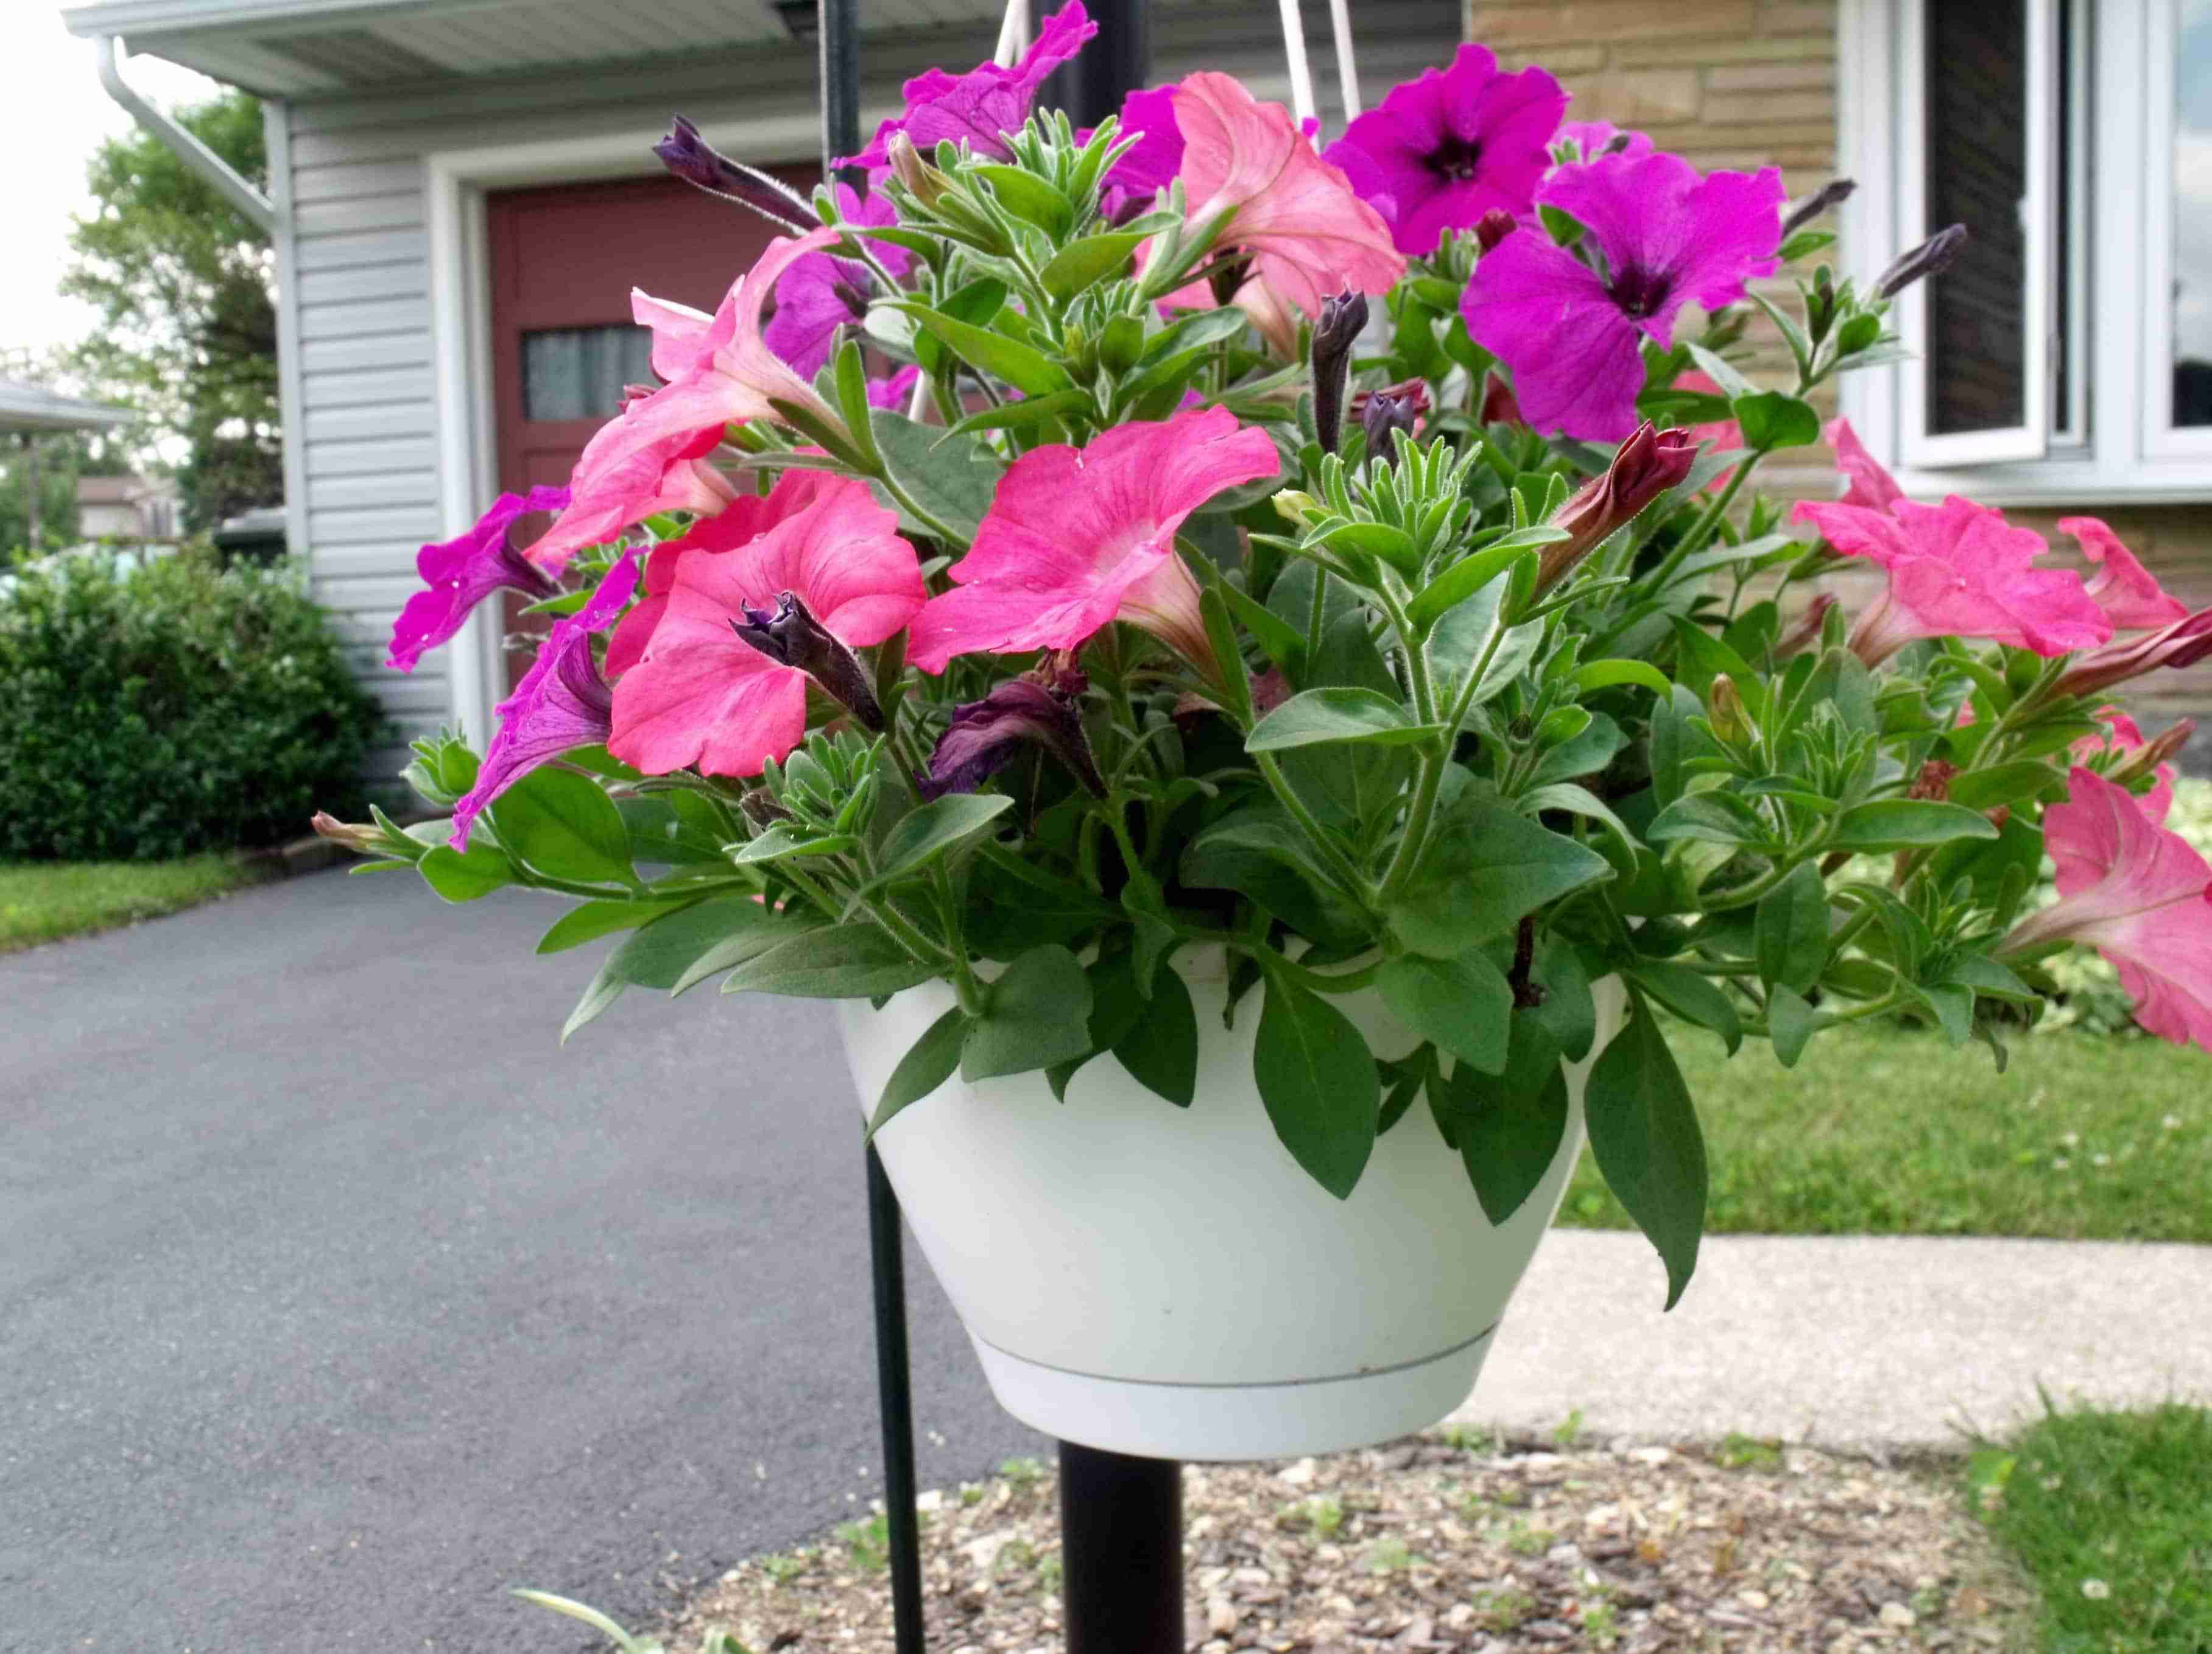 Easy Wave Petunias from #HarrisSeed